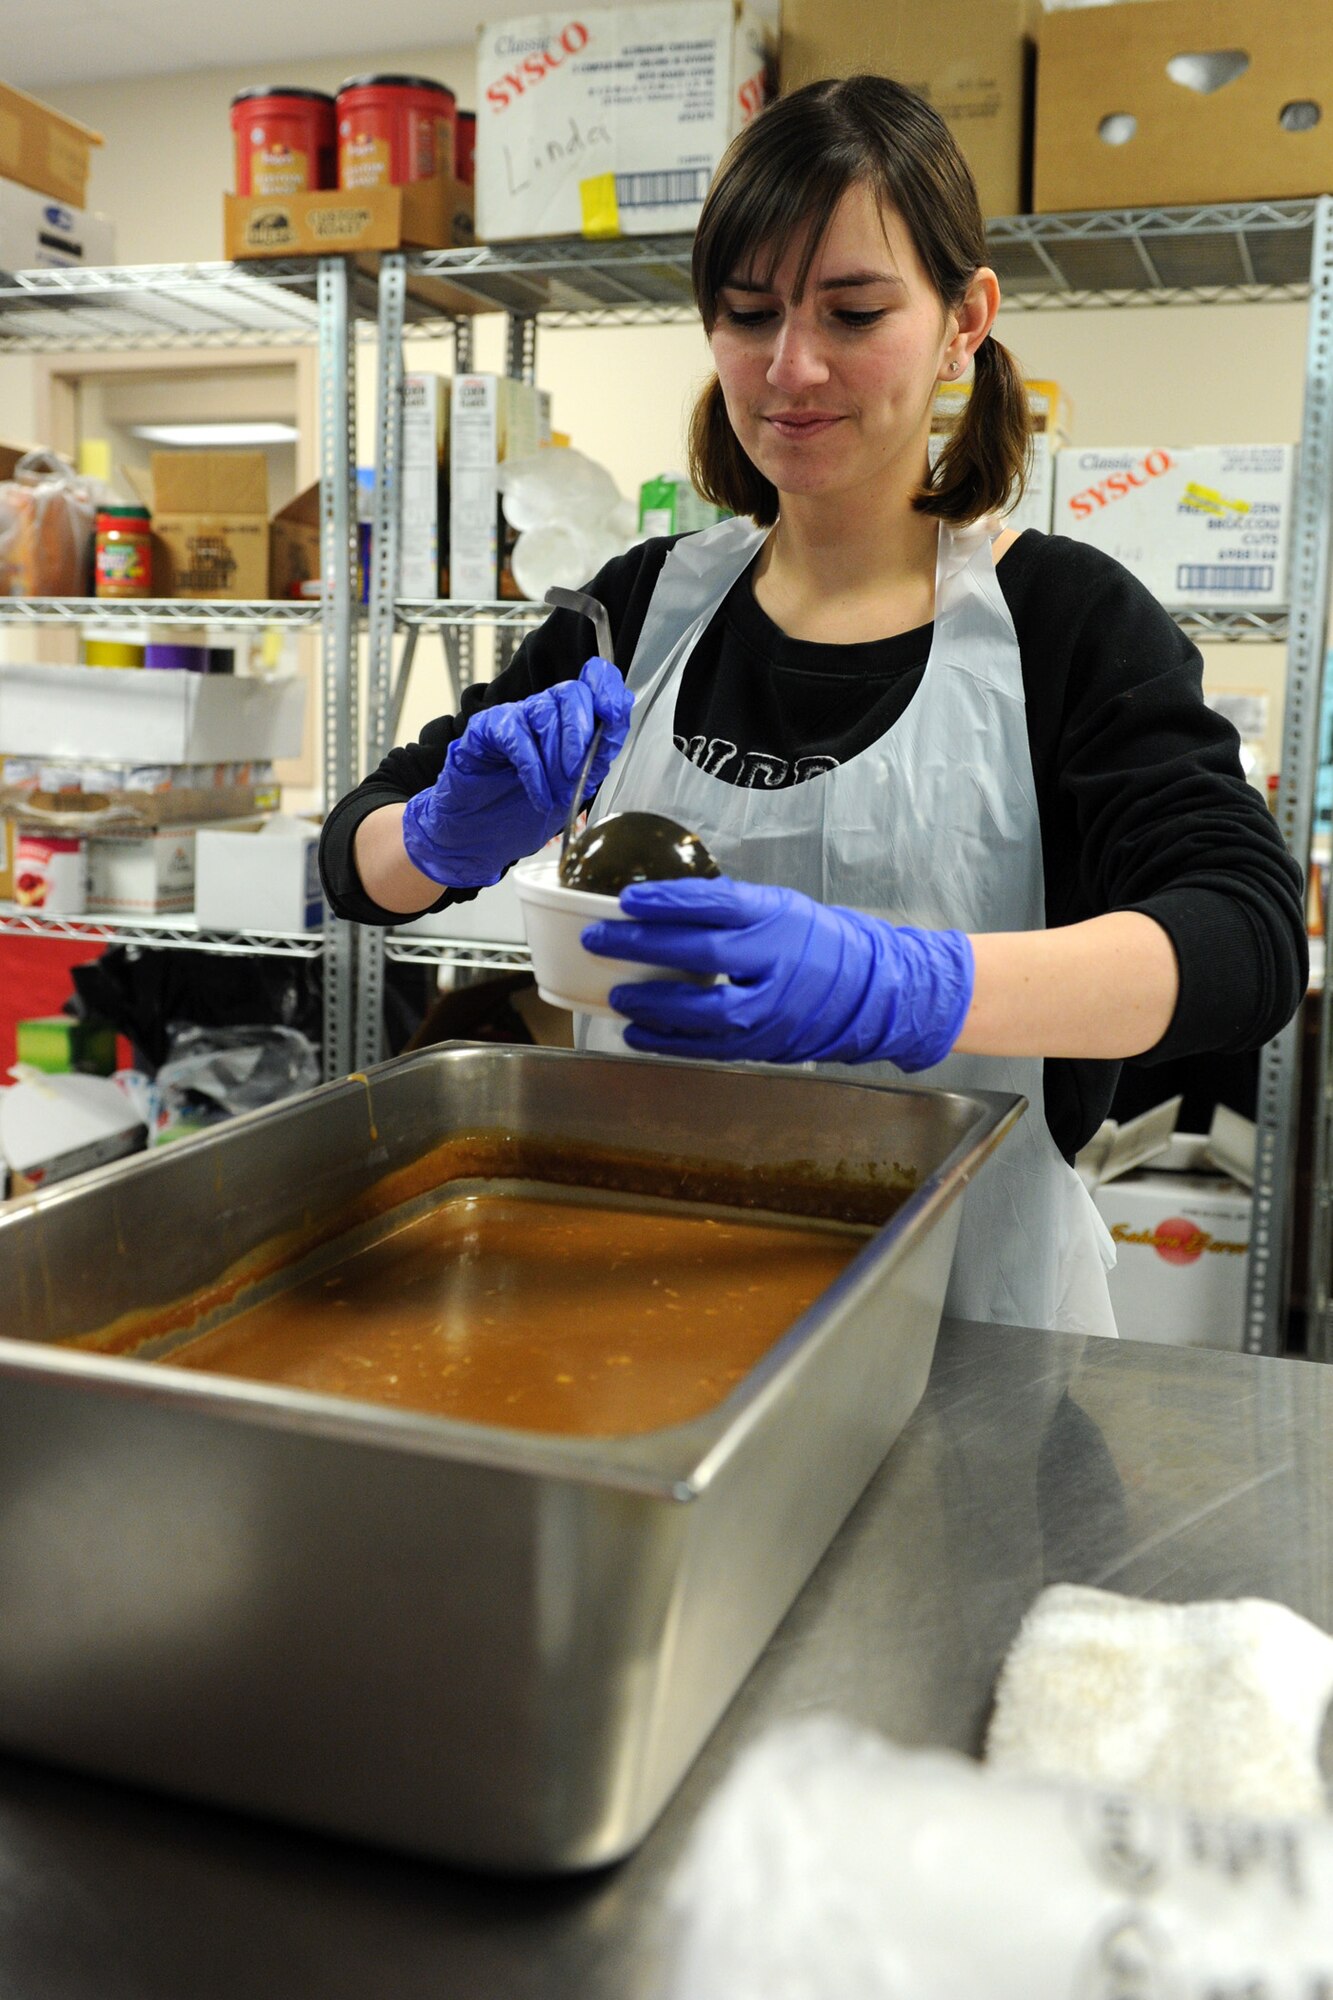 Senior Airman Kristina Chrobak, 341st Force Support Squadron relocations technician, pours gravy into a container before preparing it for delivery at the Great Falls Community Food Bank on Nov. 28. Chrobak was the event coordinator from Malmstrom Air Force Base, responsible for finding Airmen to volunteer their time by cooking, preparing and delivering Thanksgiving meals. (U.S. Air Force photo/Senior Airman Katrina Heikkinen)